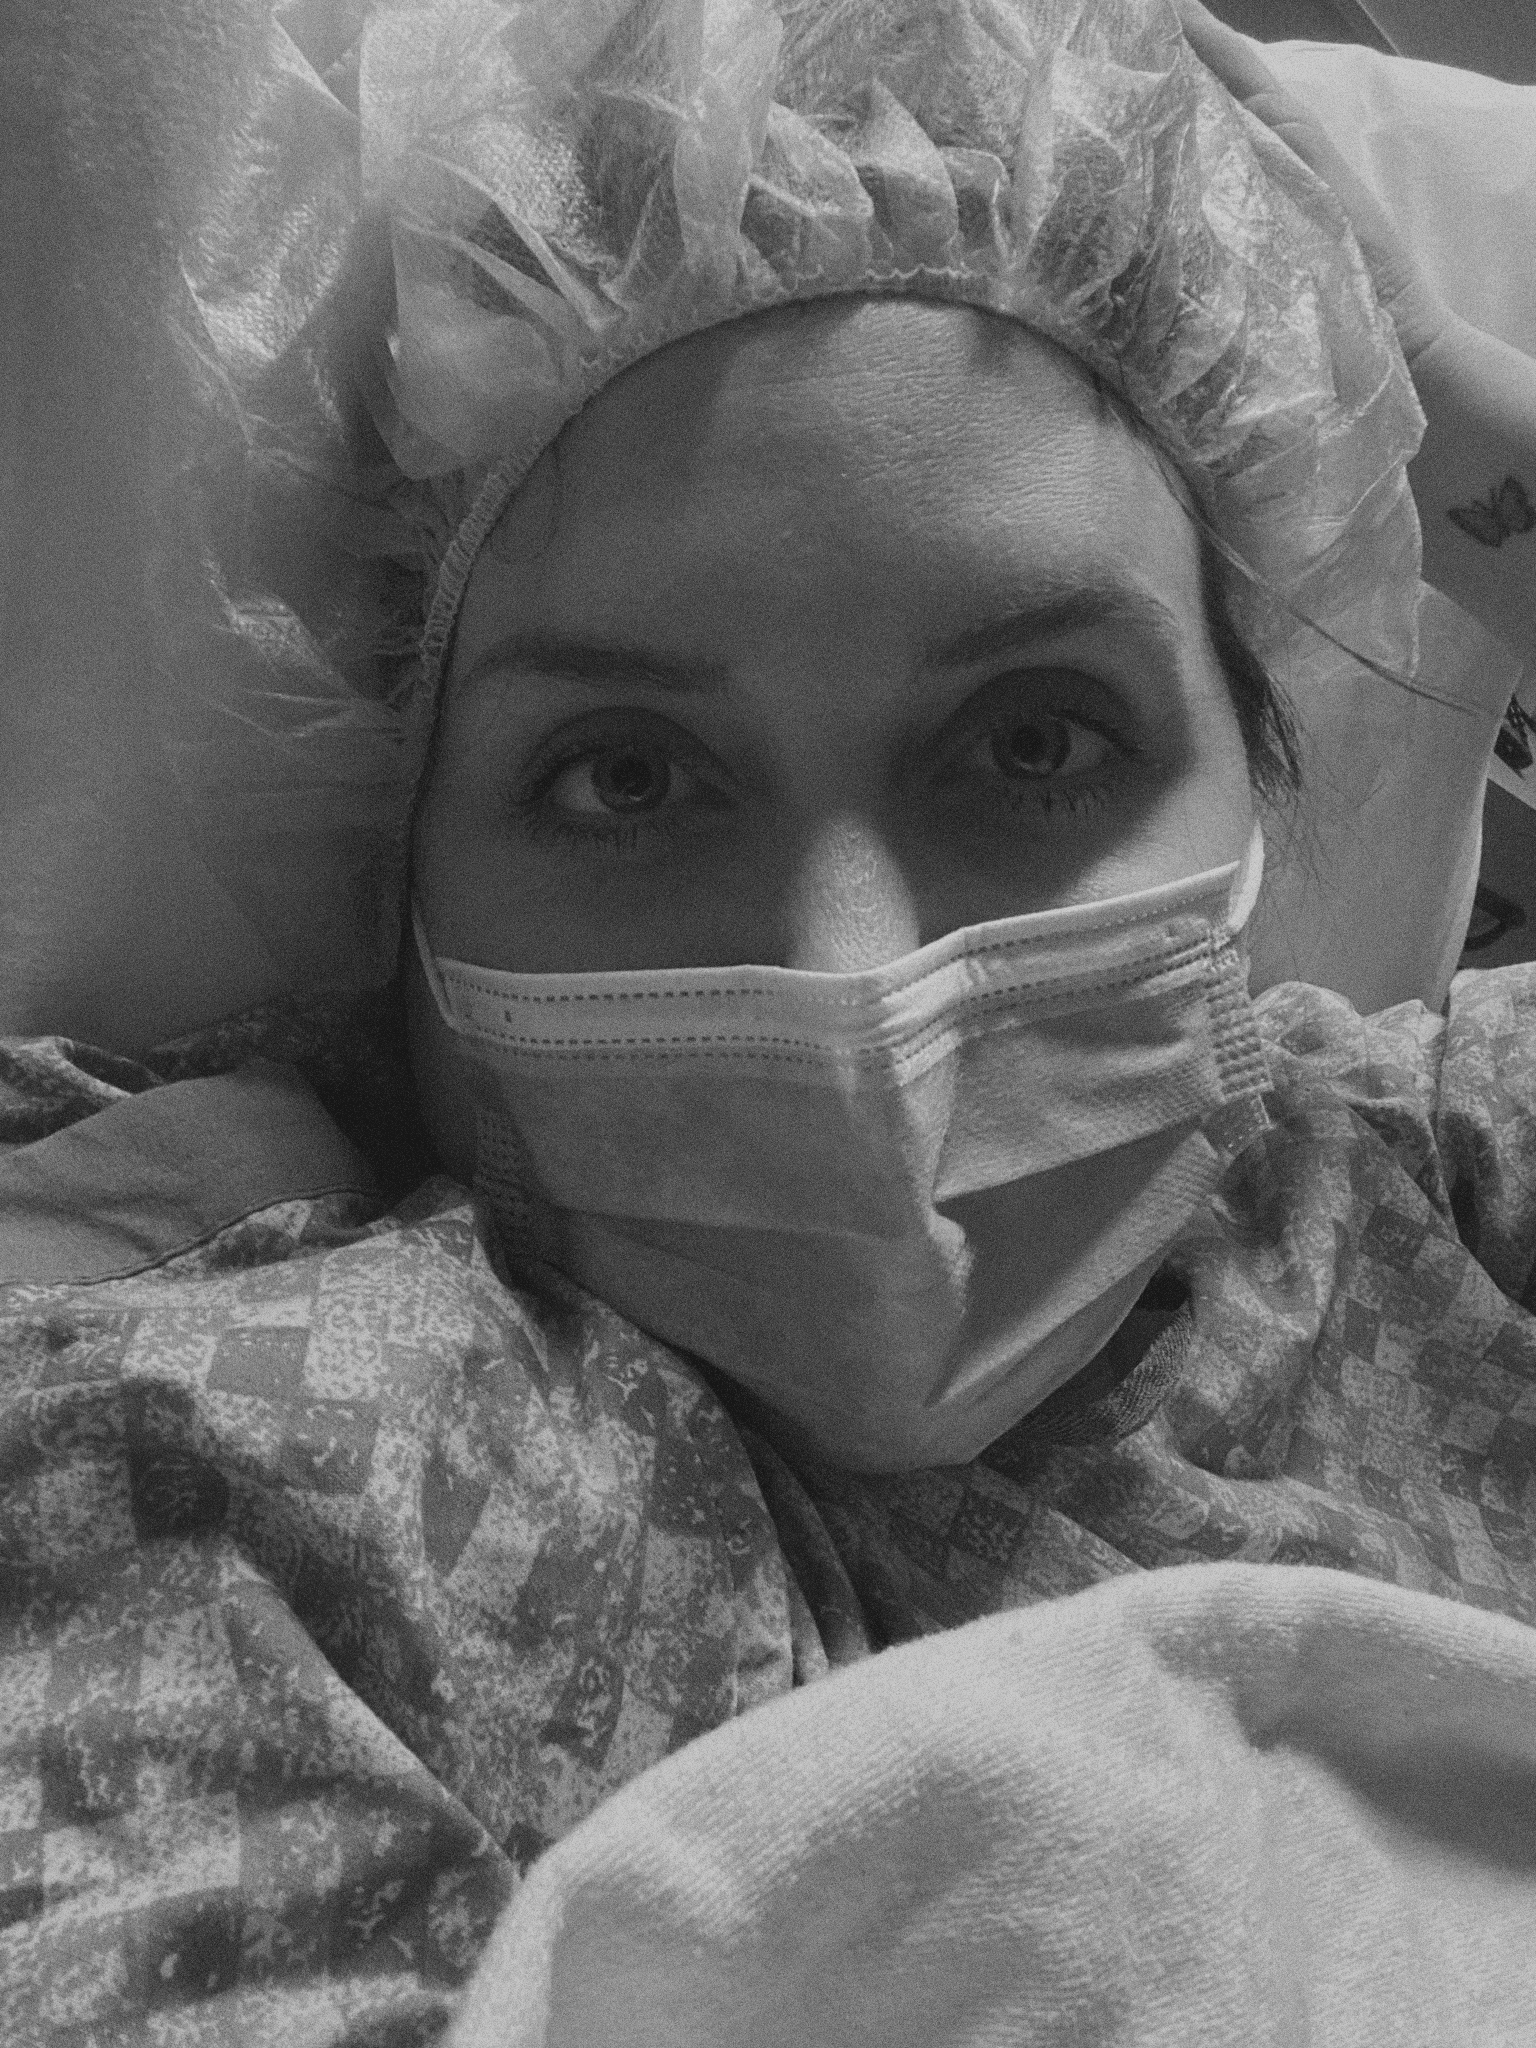 Selfie photo of Savannah in the hospital with a face mask on